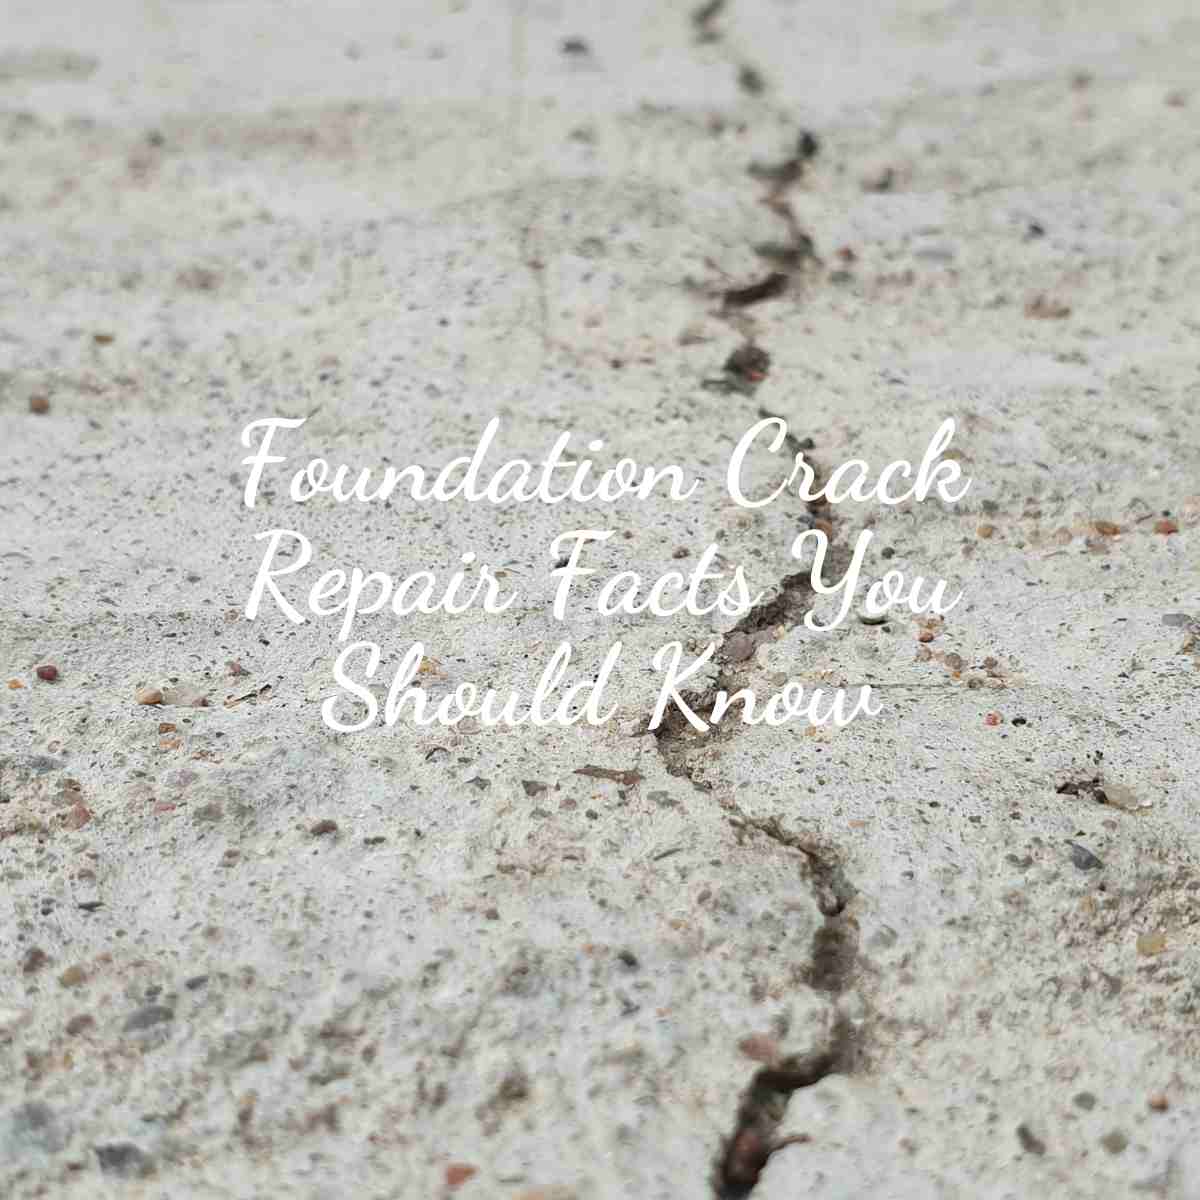 Foundation Crack Repair Facts You Should Know